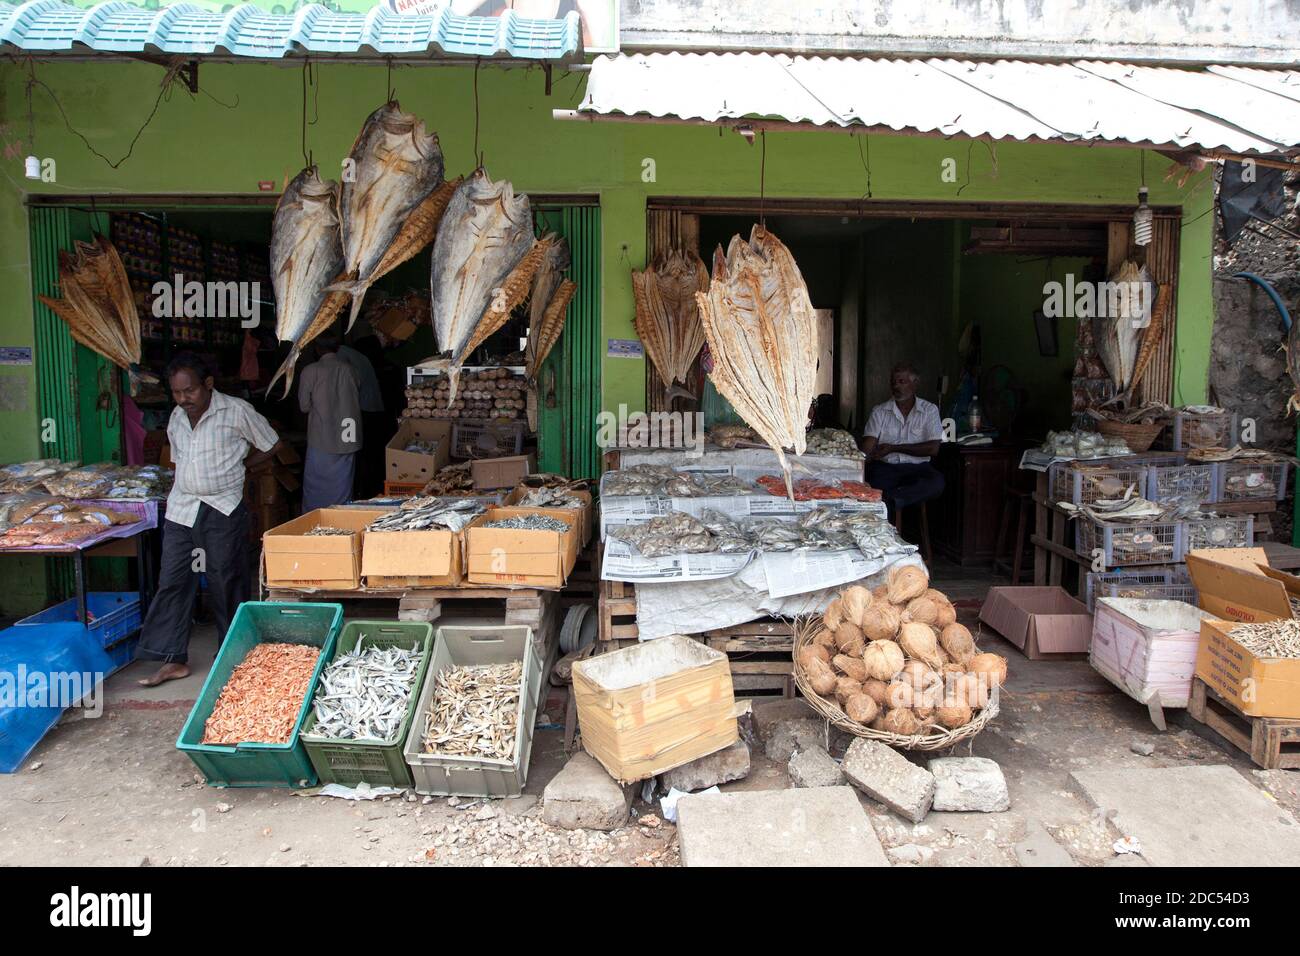 Dried fish hanging from the roof of shops and displayed in containers at Jaffna in the northern region of Sri Lanka. Stock Photo